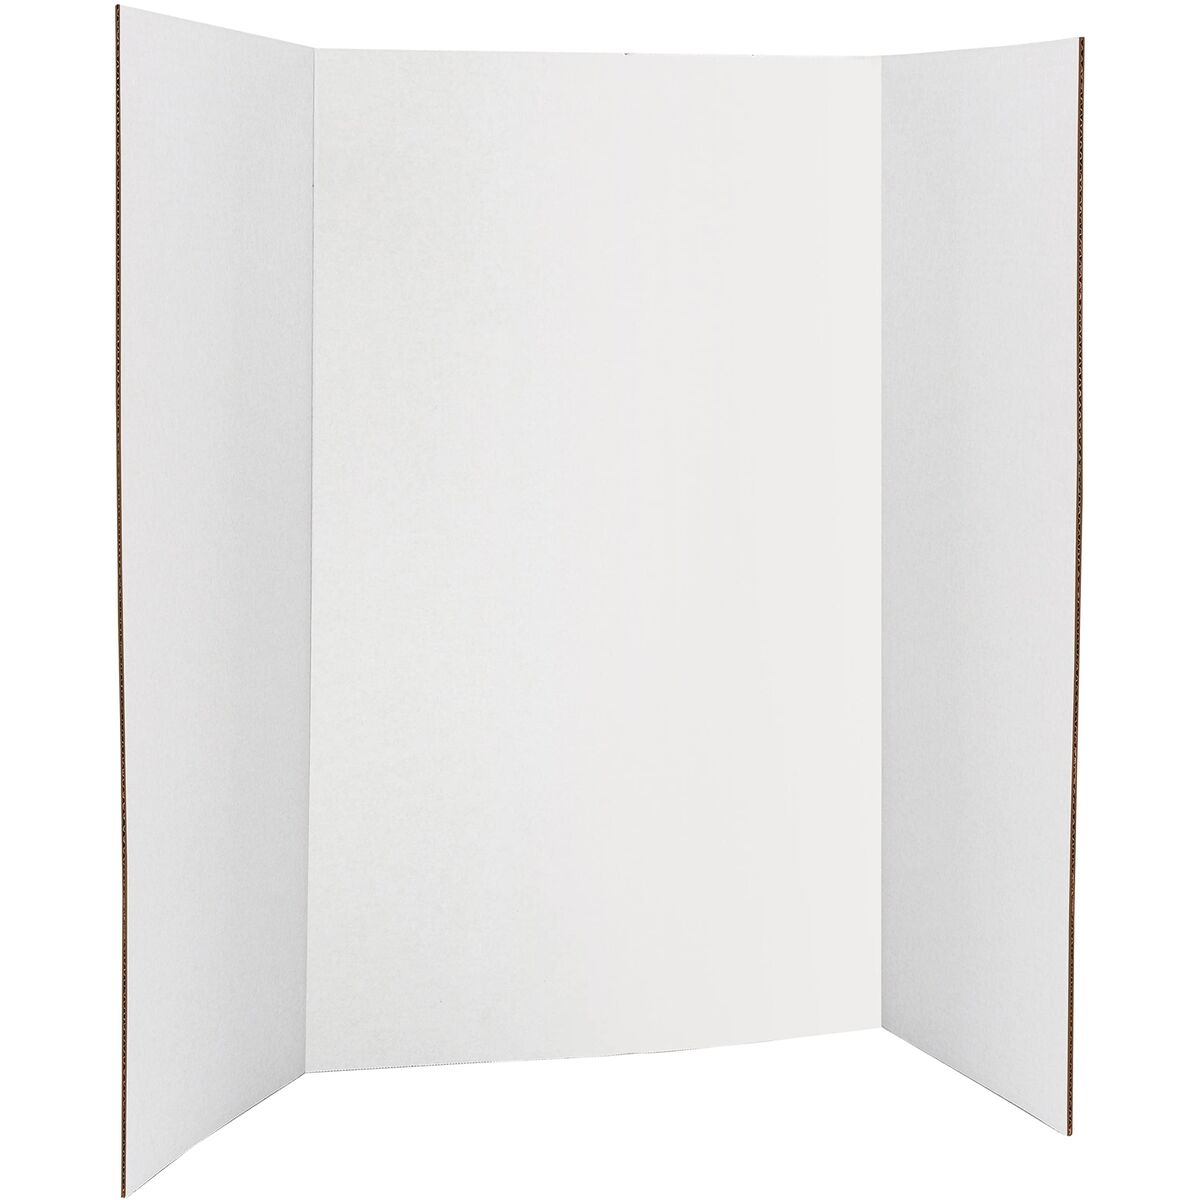 Trifold Poster Board 36 x 48 White Presentation Board Science Fair Display Boards - for School, Fun Projects and Business Presentations - by Emraw